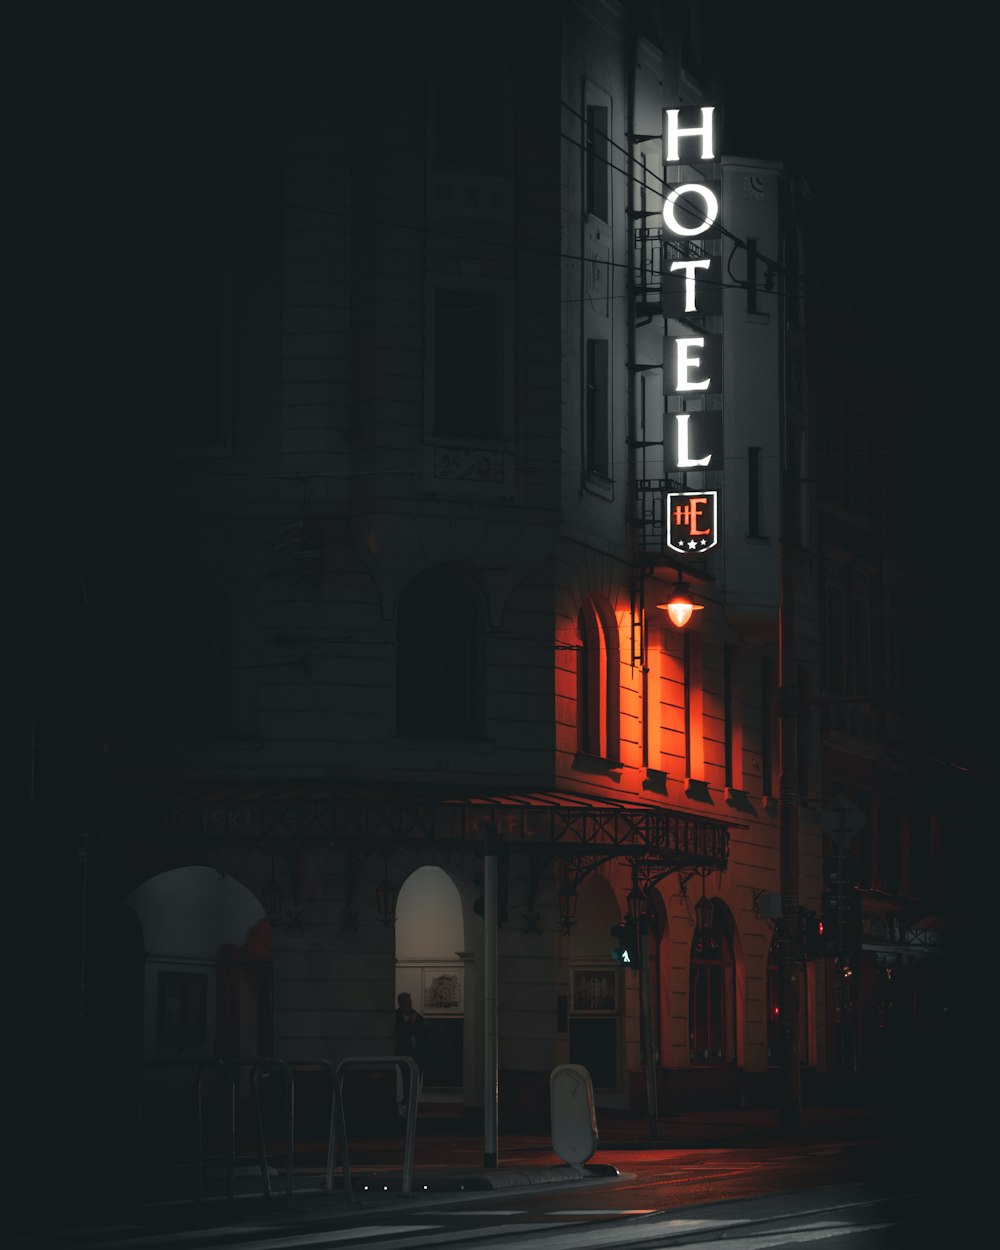 a hotel sign lit up at night on the side of a building